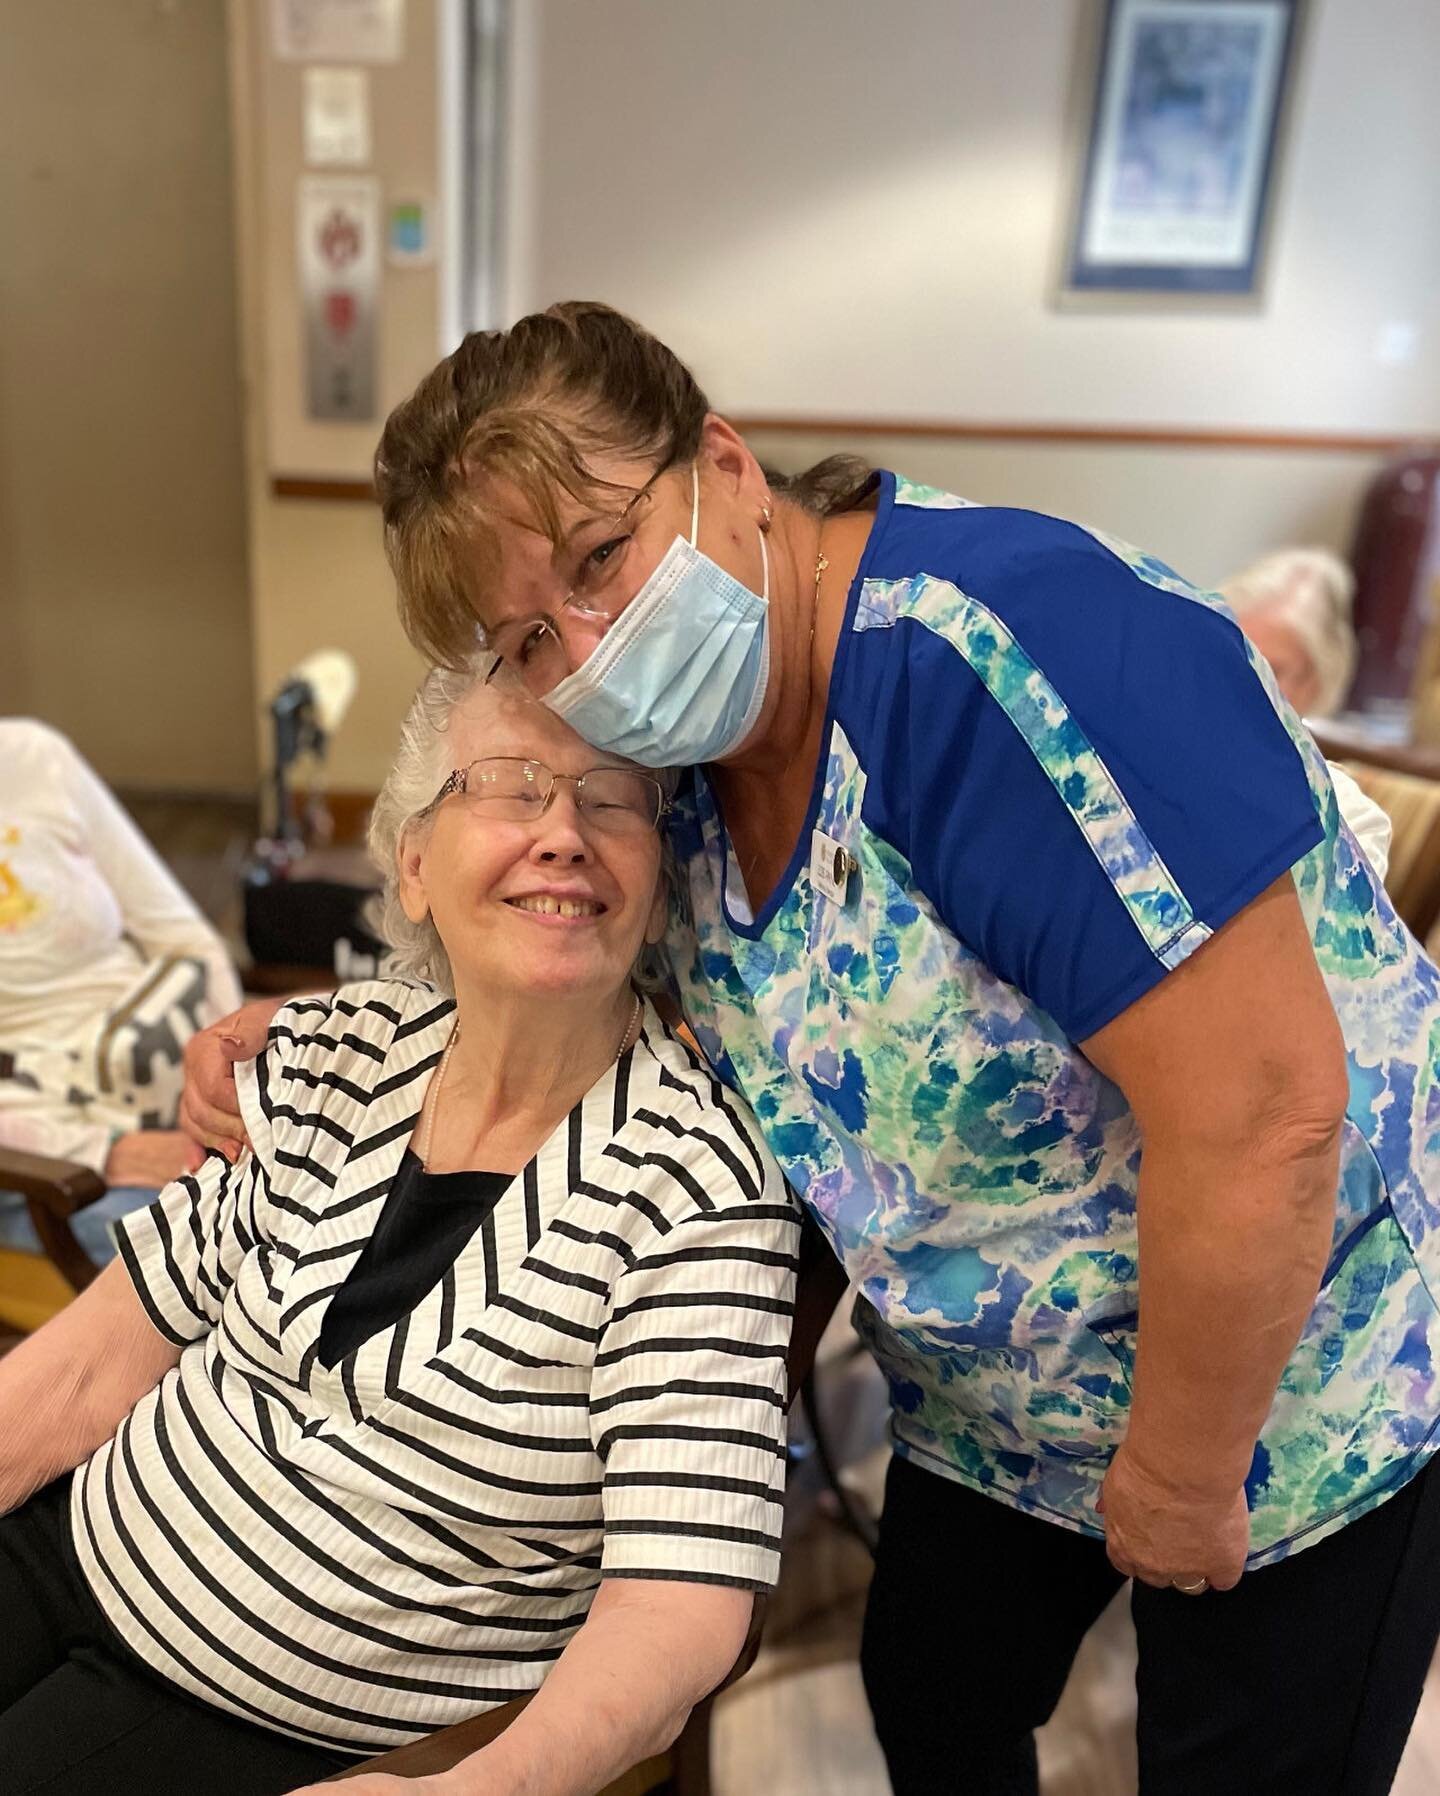 We had a bittersweet goodbye this week as we said farewell to Lois, our amazingly compassionate and well-loved Wellness Director at Pioneer Village. Lois has been with Radiant Senior Living for a long time and her presence will be sorely missed.⠀
⠀
L